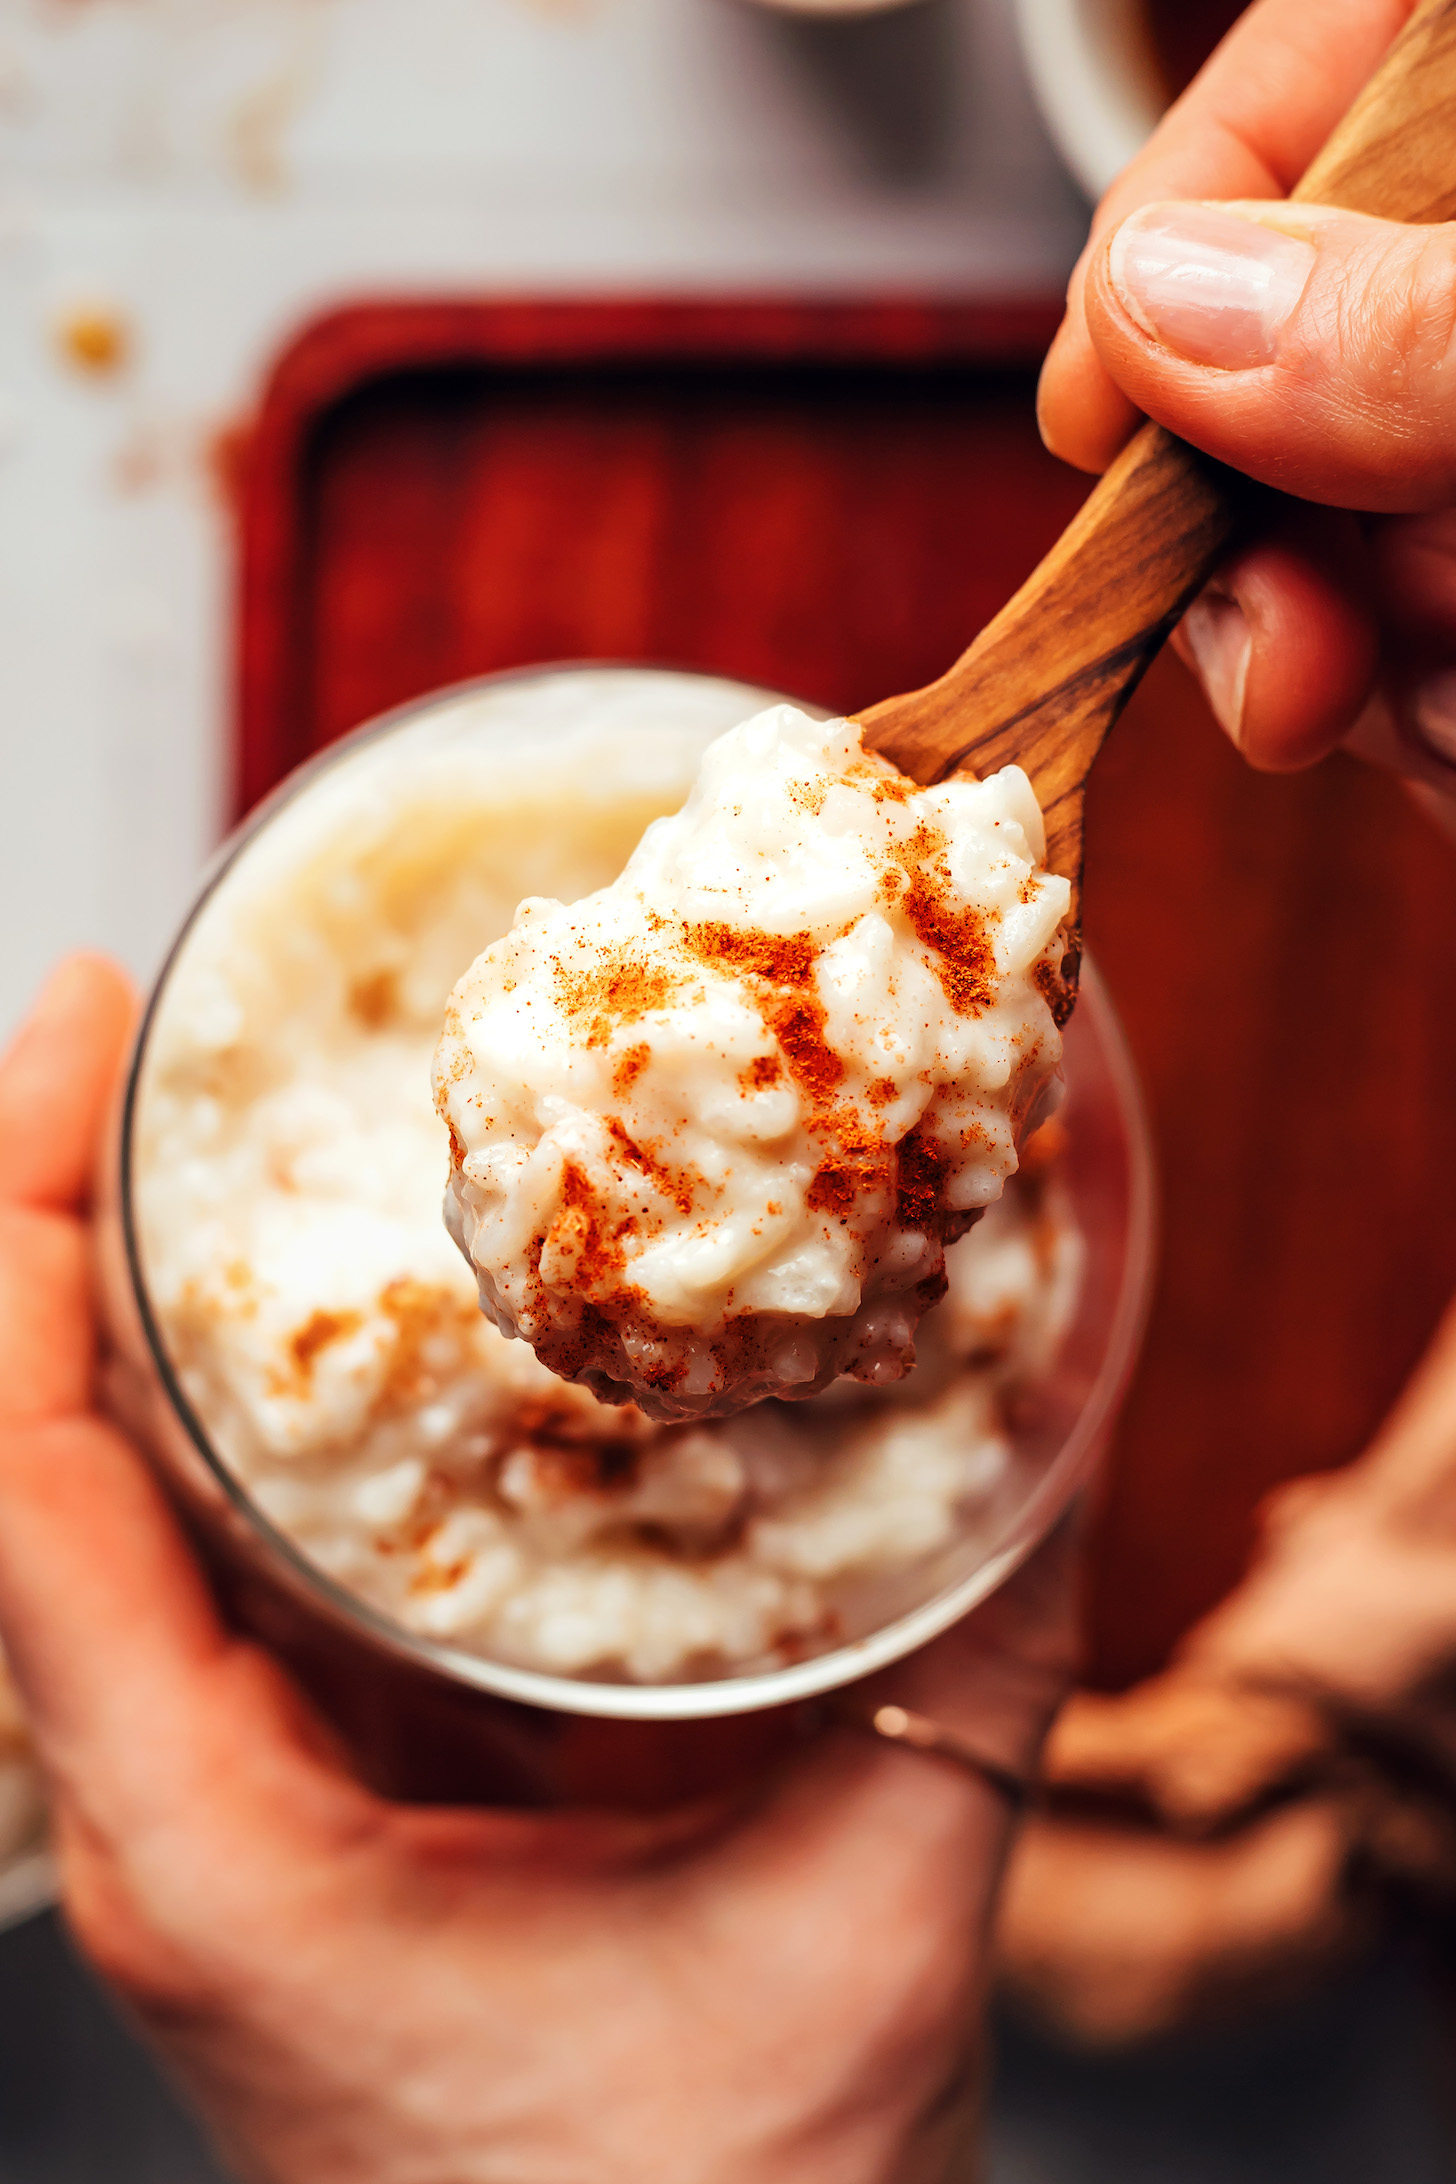 Spoon holding a bite of rice pudding sprinkled with cinnamon